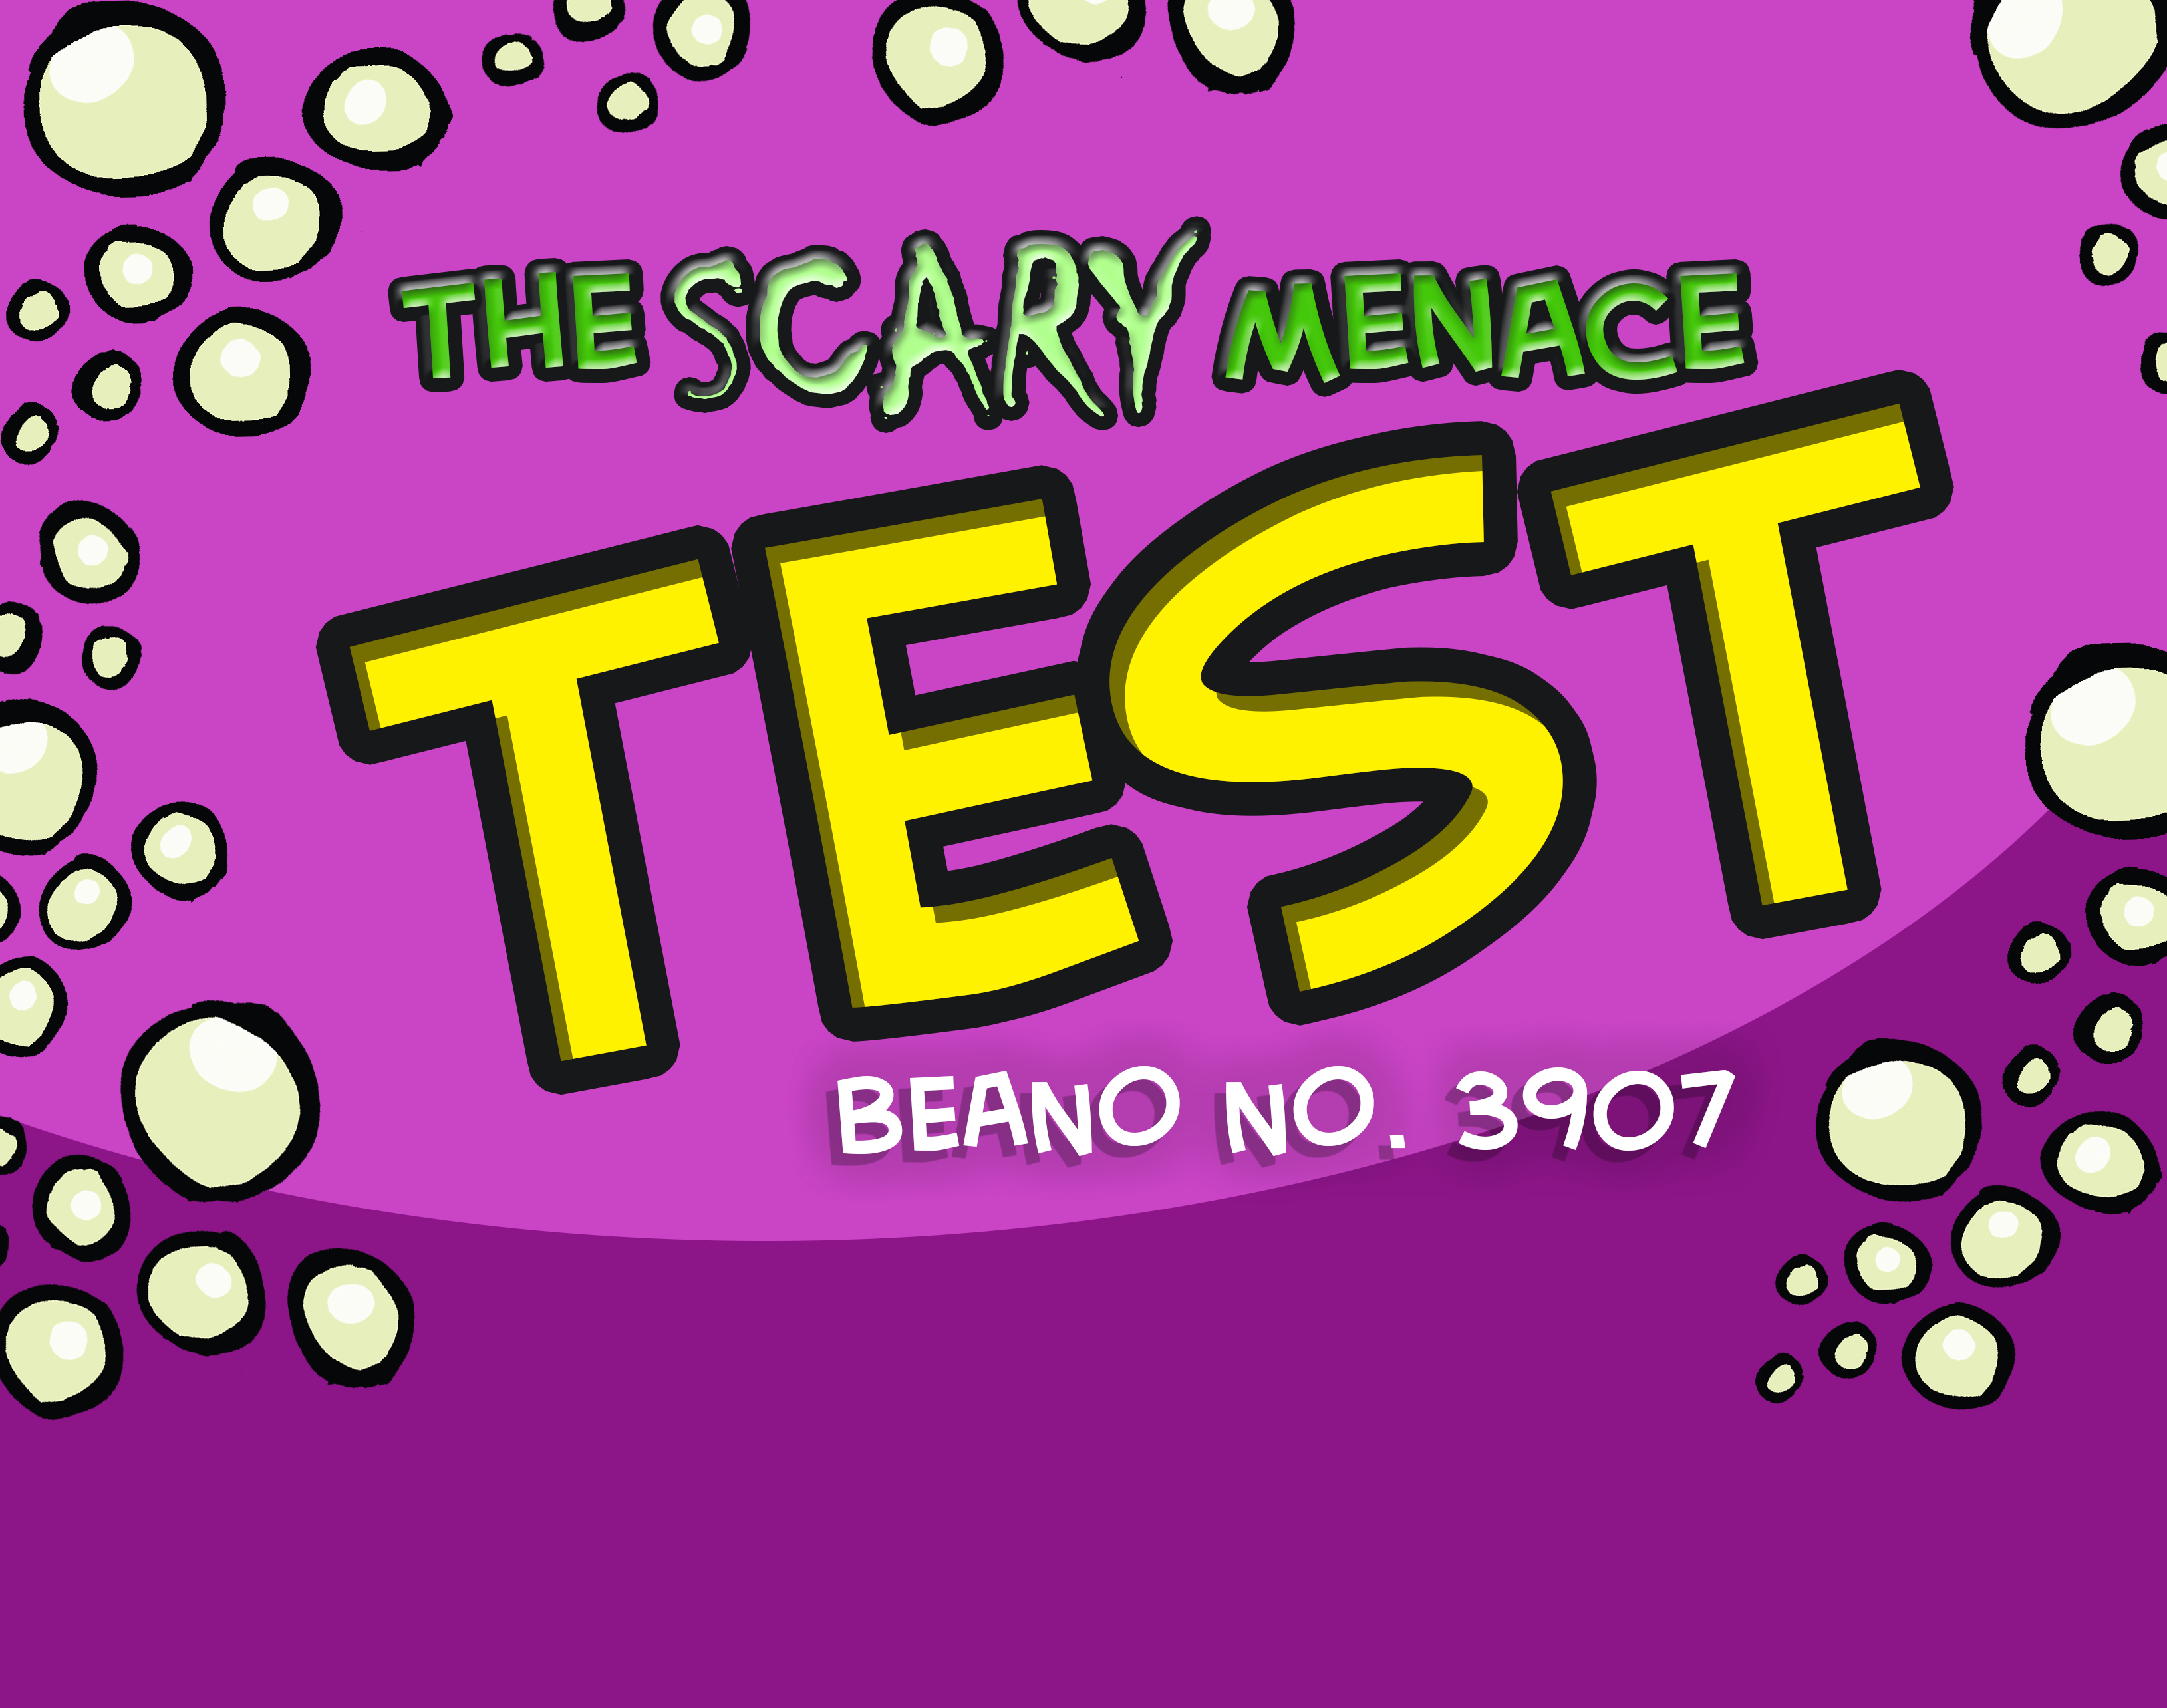 Can you ace the scary menace test this week?